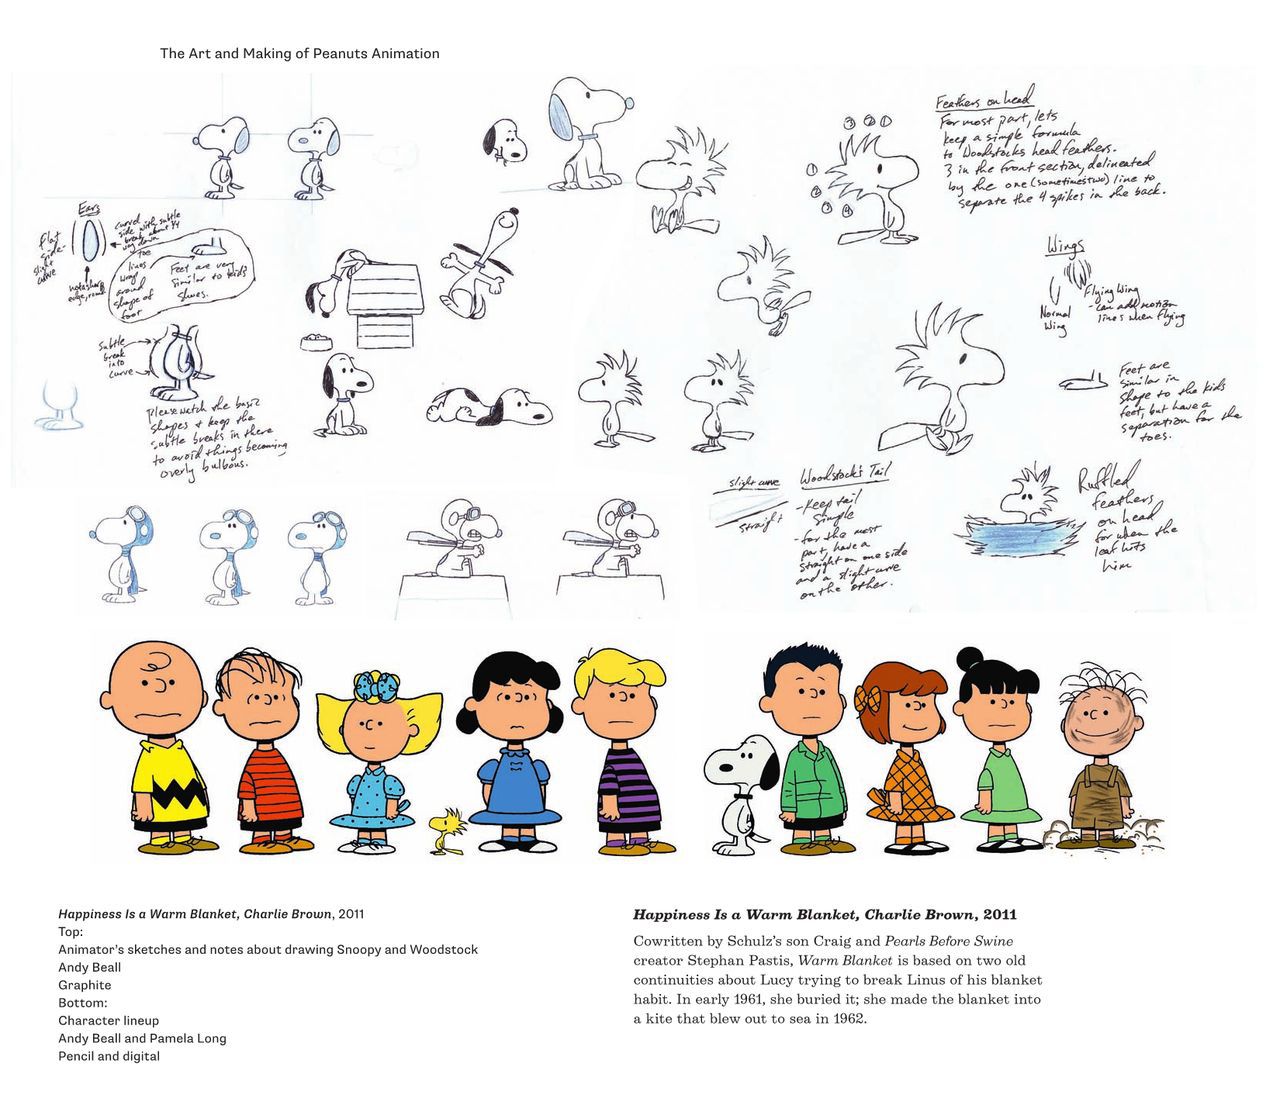 The Art and Making of Peanuts Animation 186